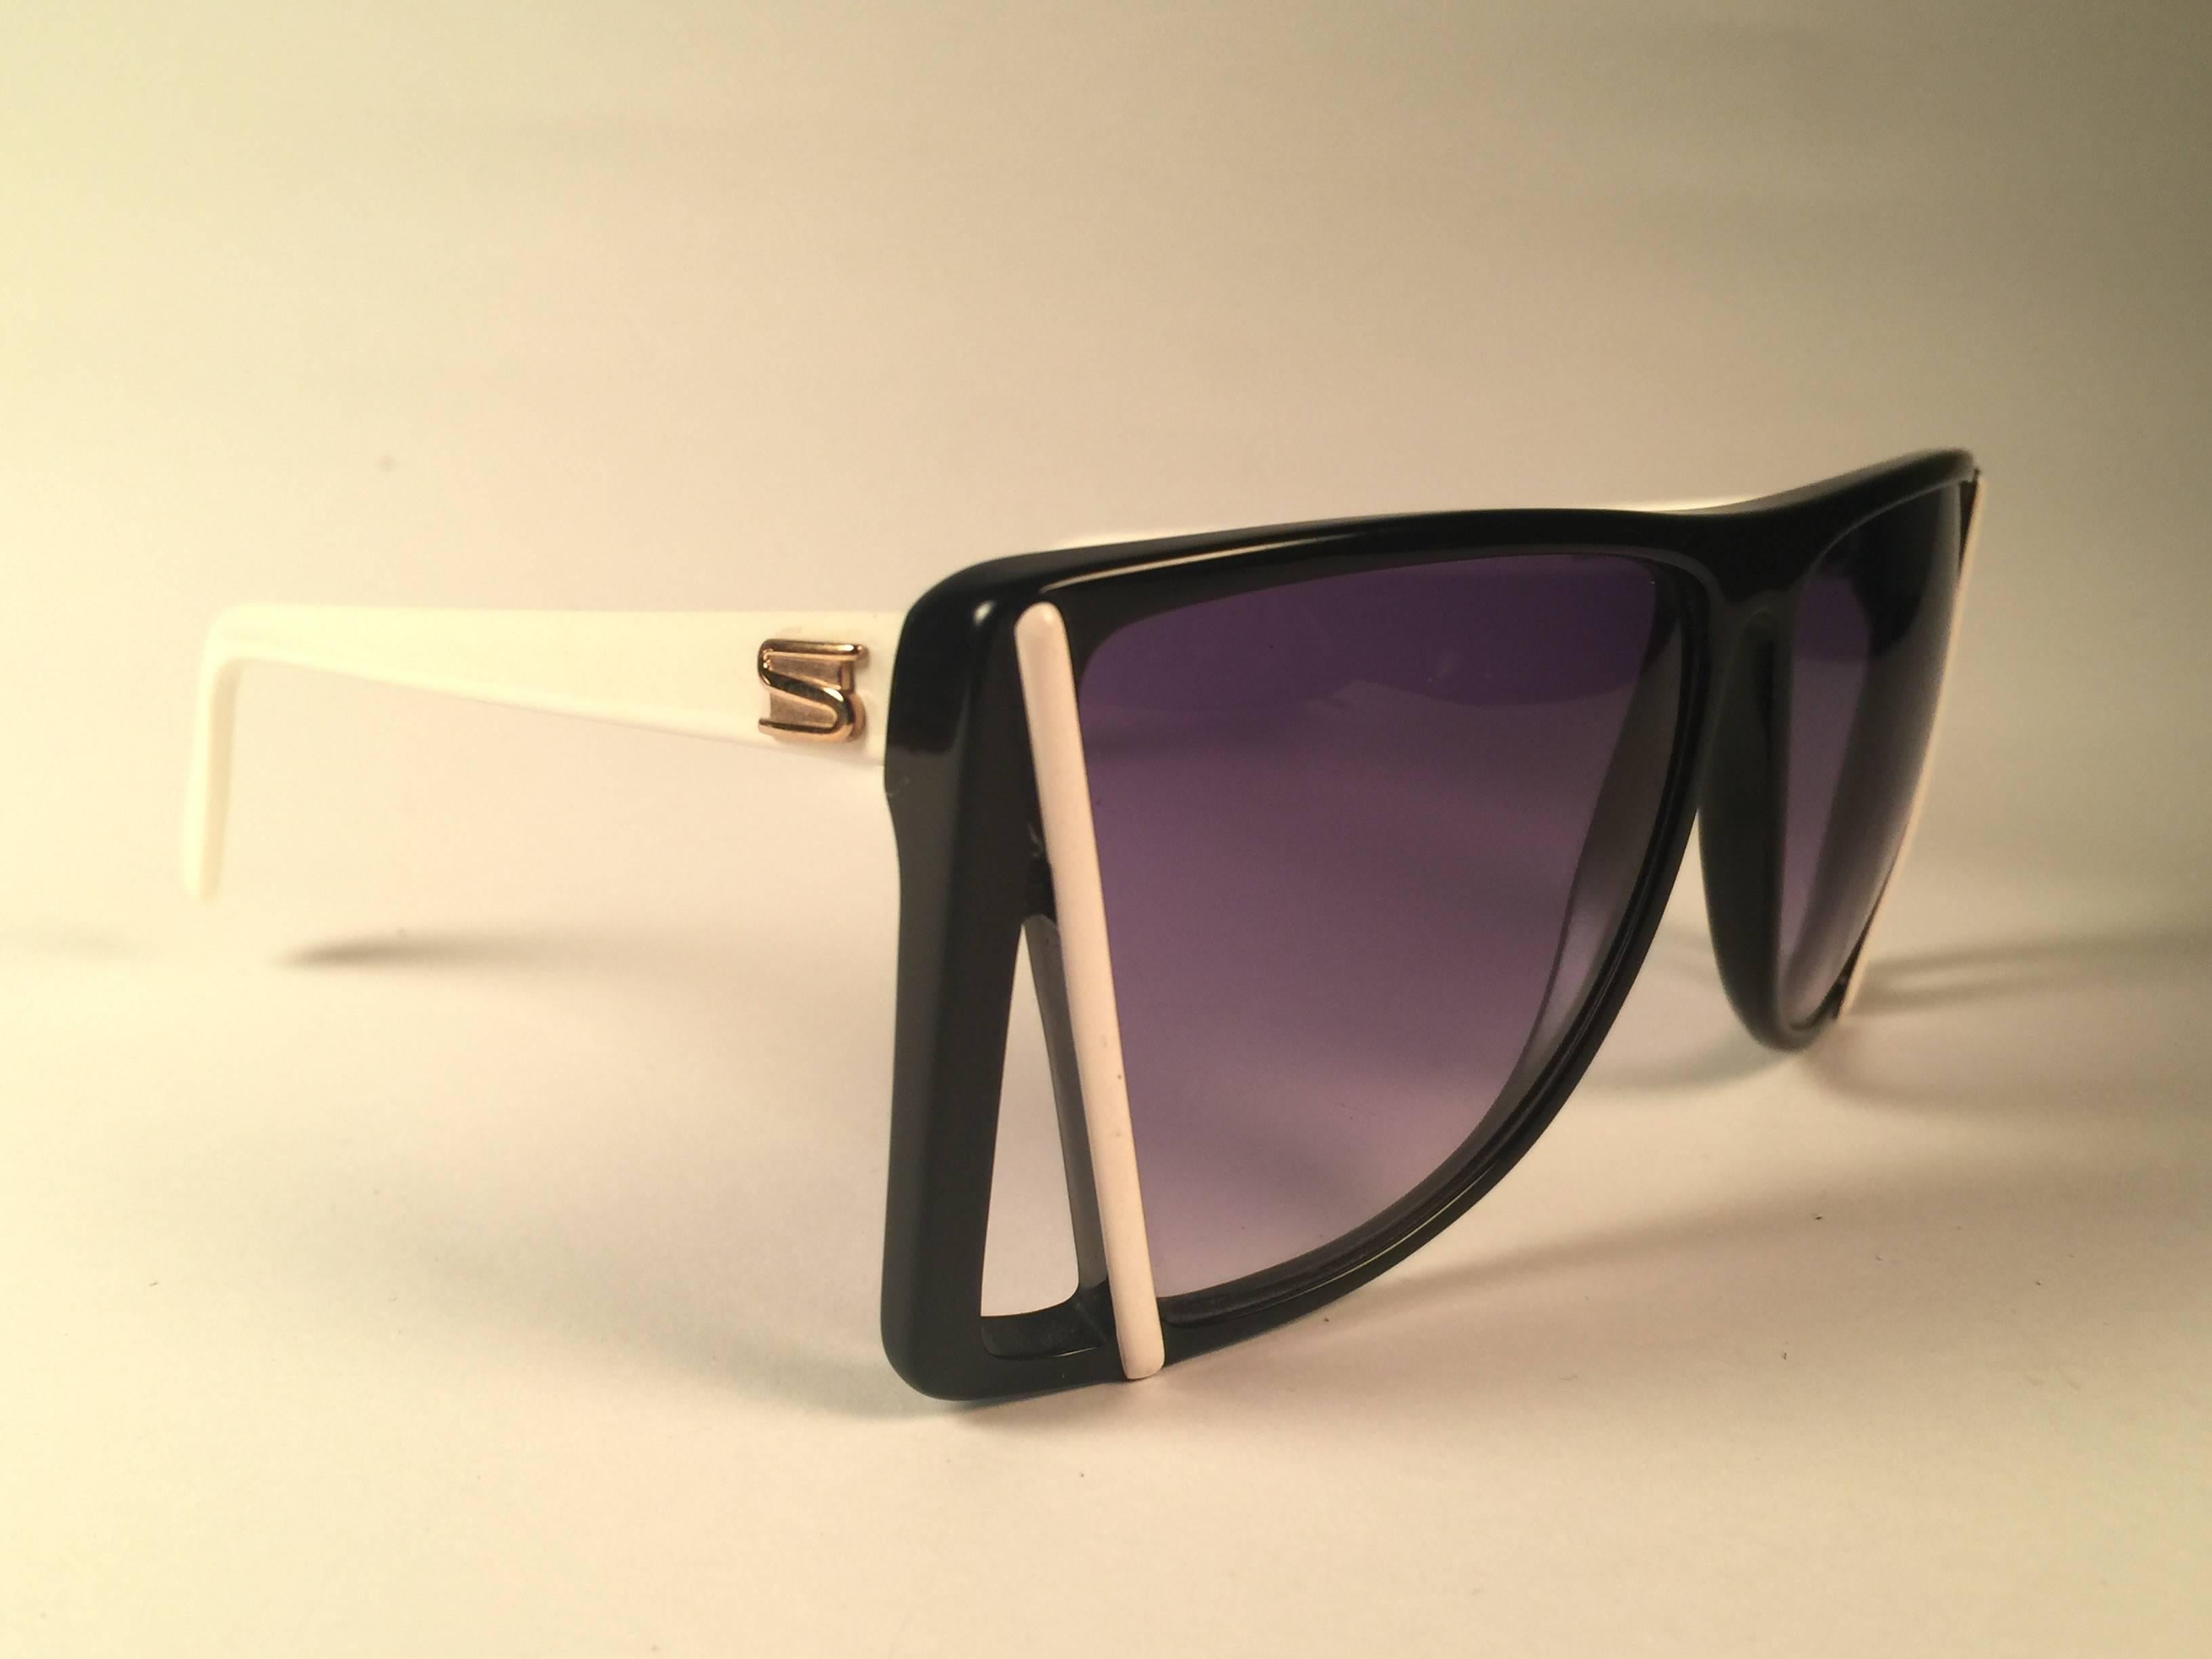 New Vintage Silhouette black with white accents sunglasses. Cut out frame sporting a pair of purple lenses.

Never worn or displayed. This item may show minor sign of wear due to nearly 40 years of storage.

Designed and produced in Austria.